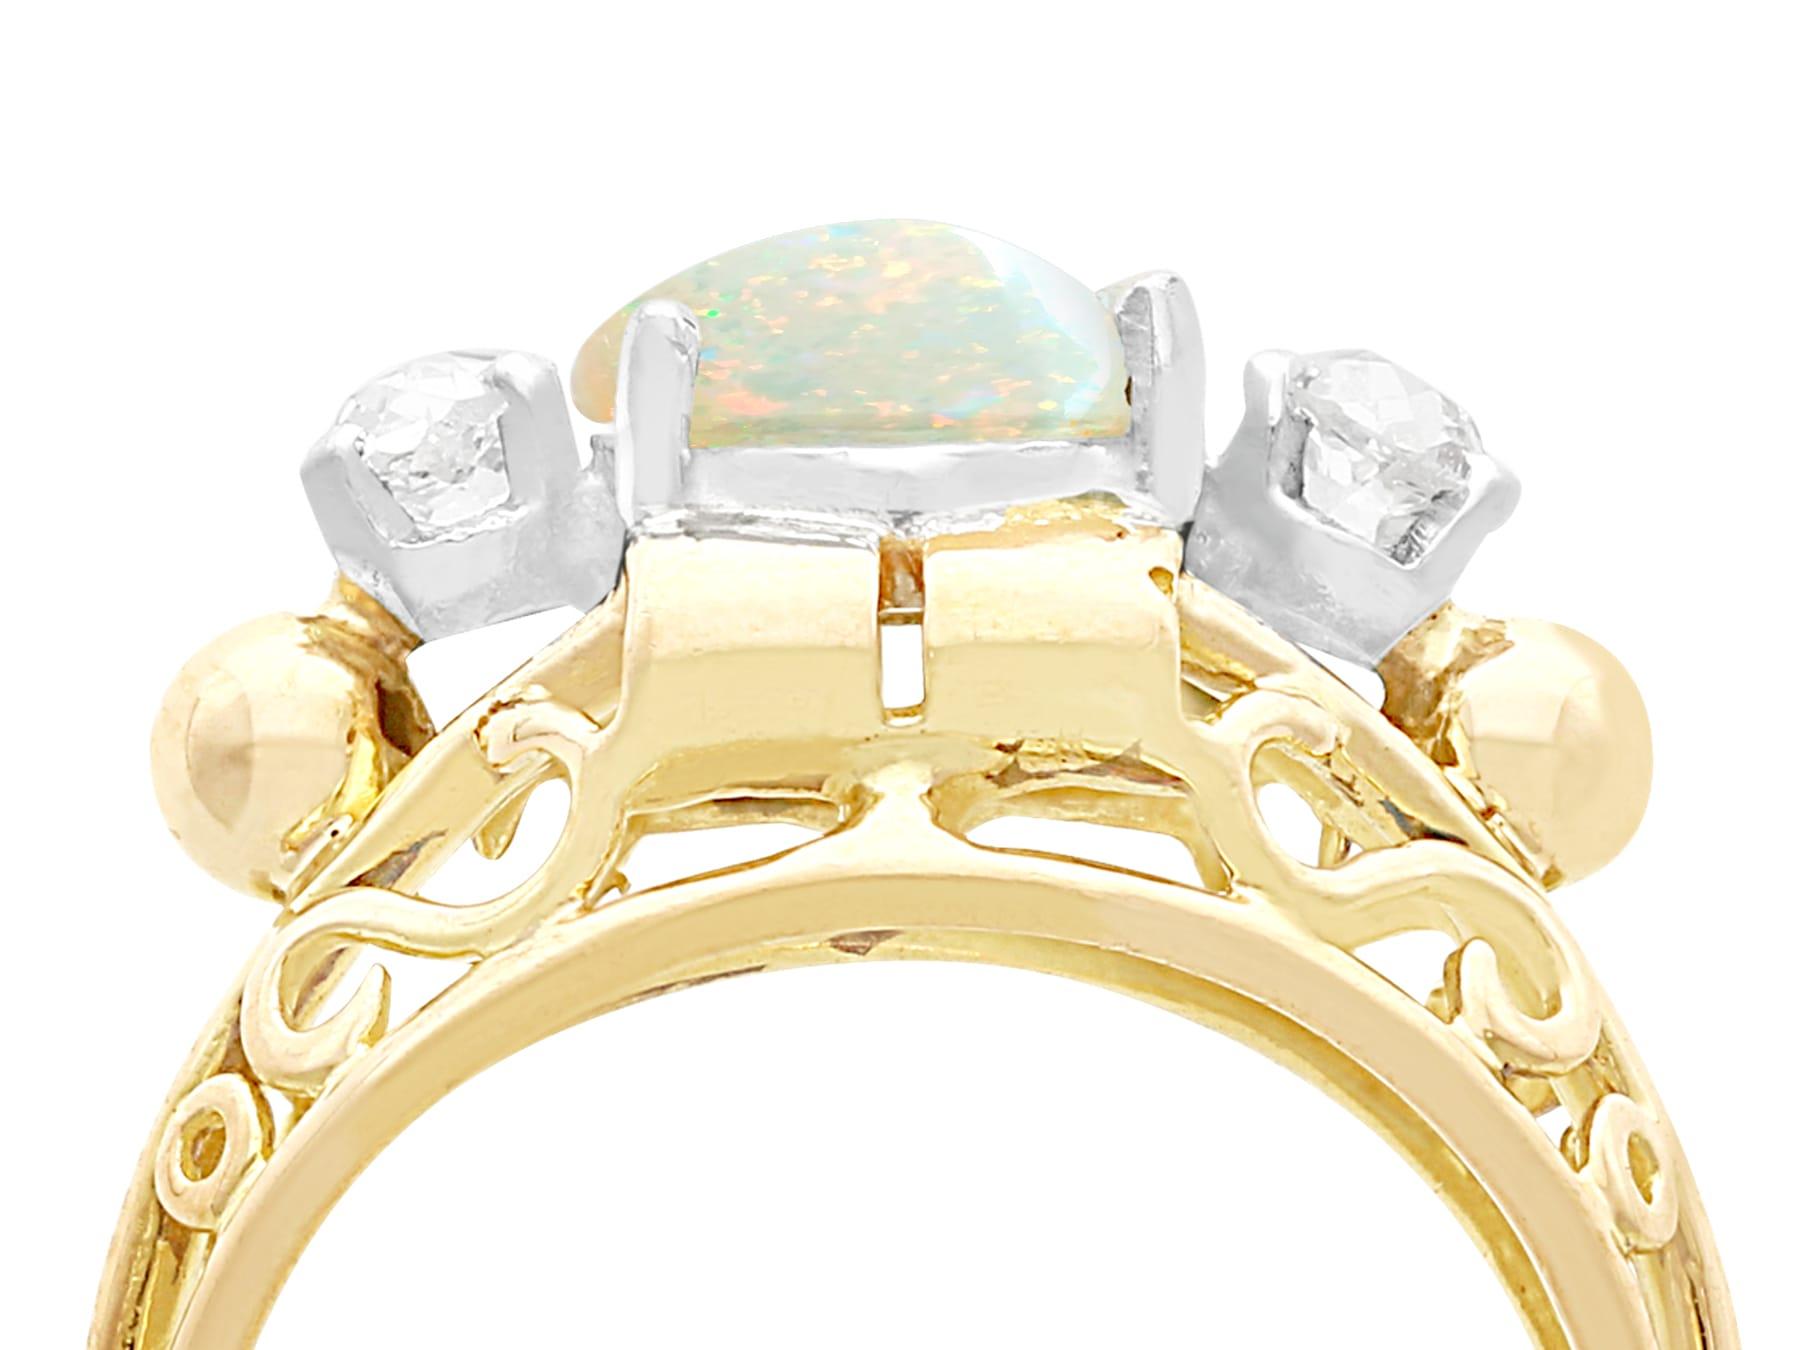 An impressive antique 1.82 carat white opal and 0.35 carat diamond, 18 karat yellow gold and platinum set cocktail ring; part of our diverse antique jewelry collections.

This fine and impressive antique cabochon cut opal and diamond ring has been